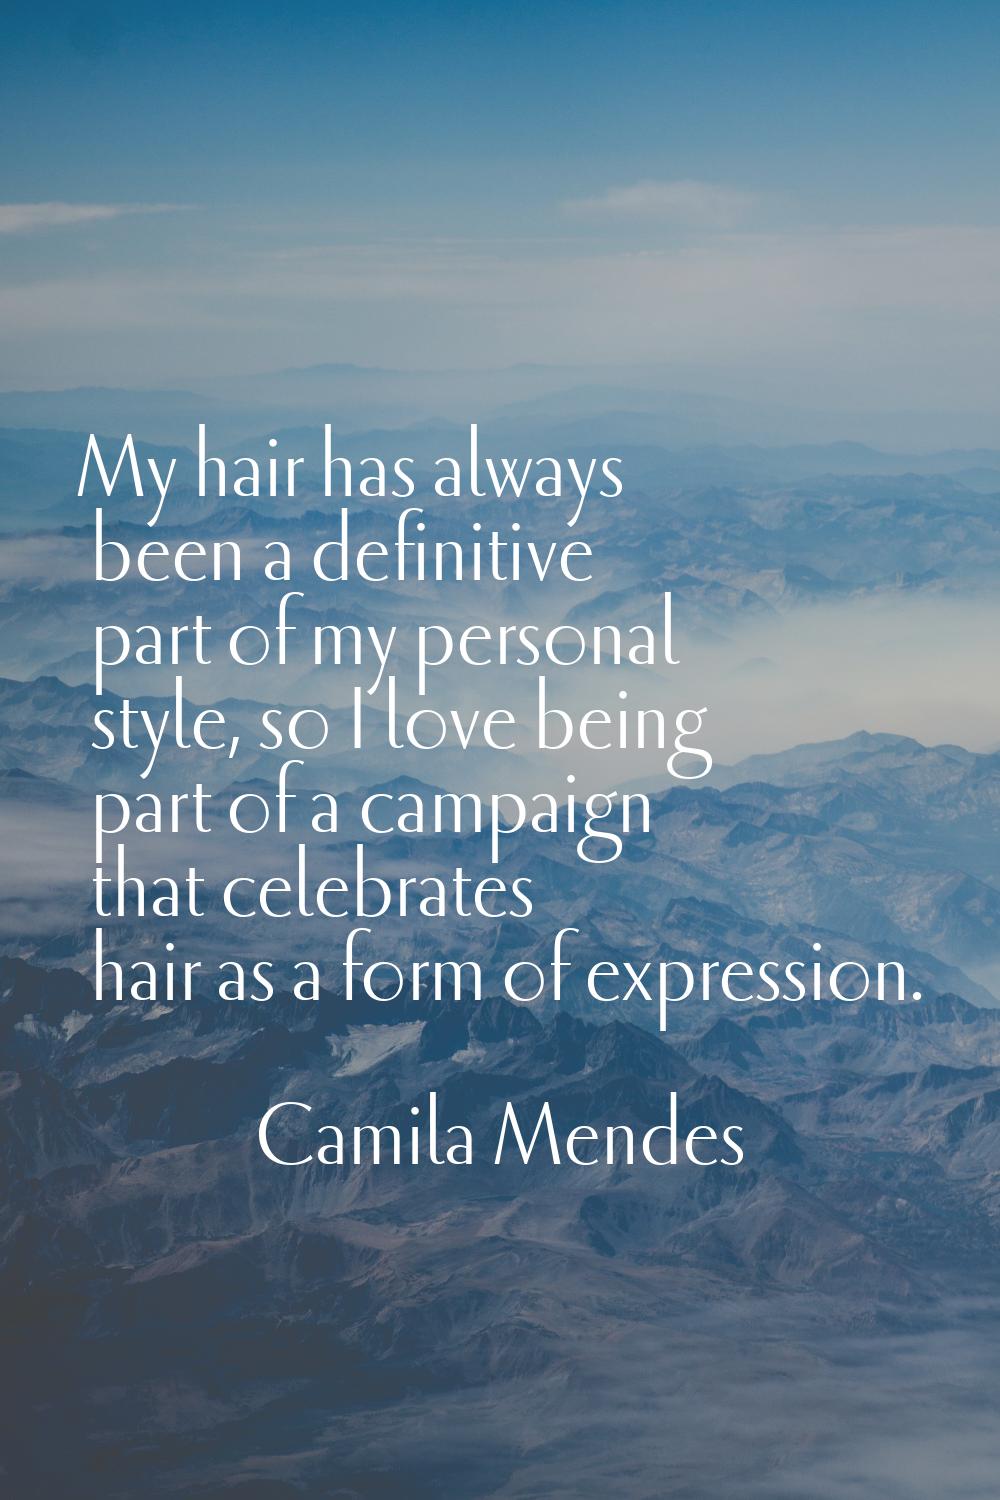 My hair has always been a definitive part of my personal style, so I love being part of a campaign 